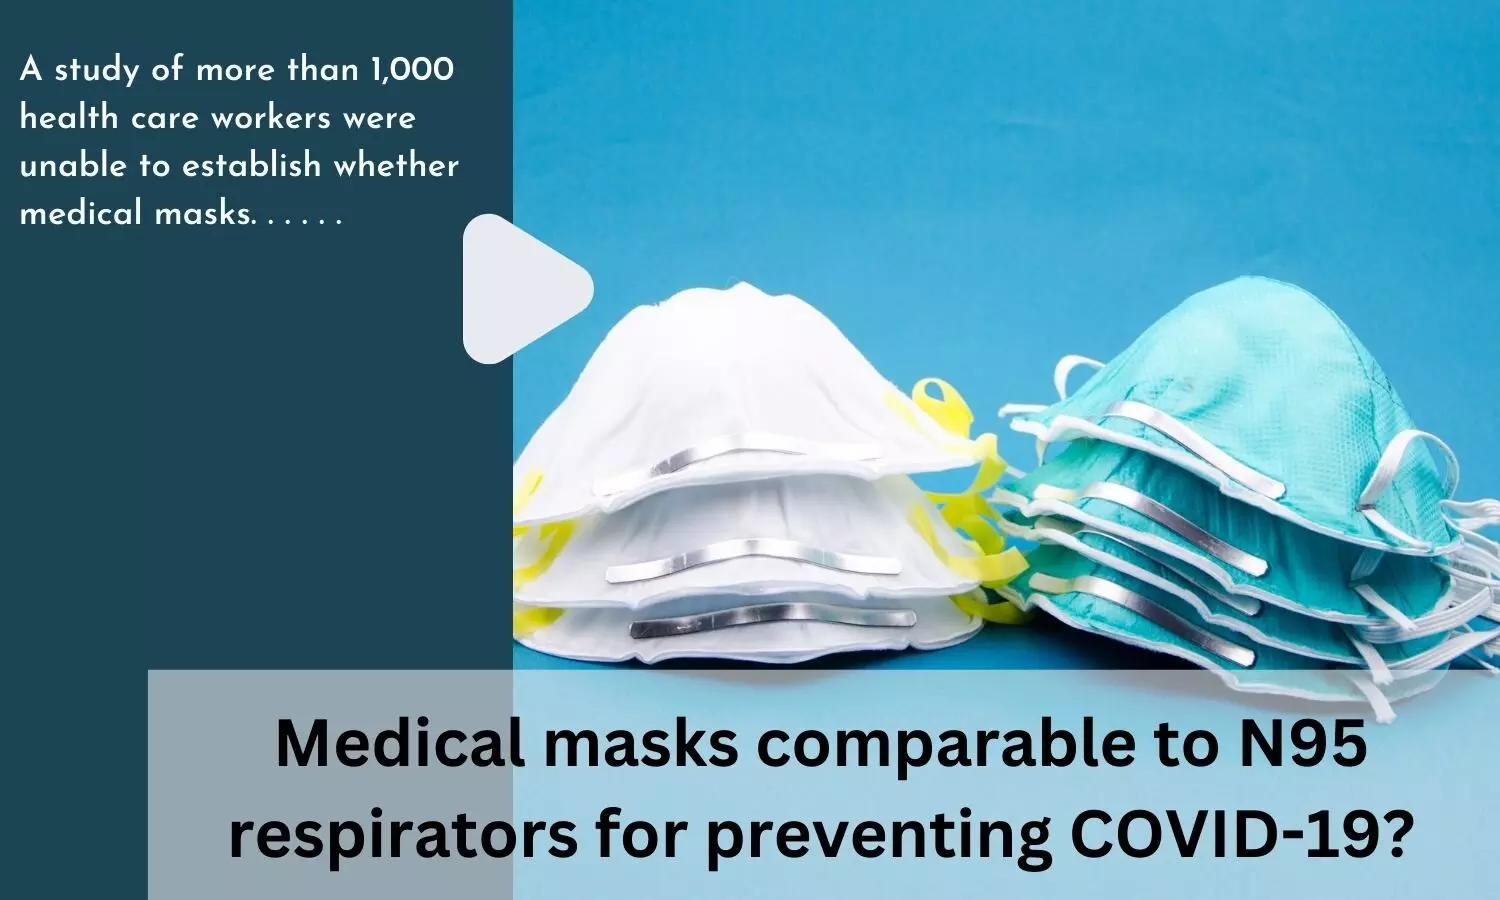 Medical masks comparable to N95 respirators for preventing COVID-19?